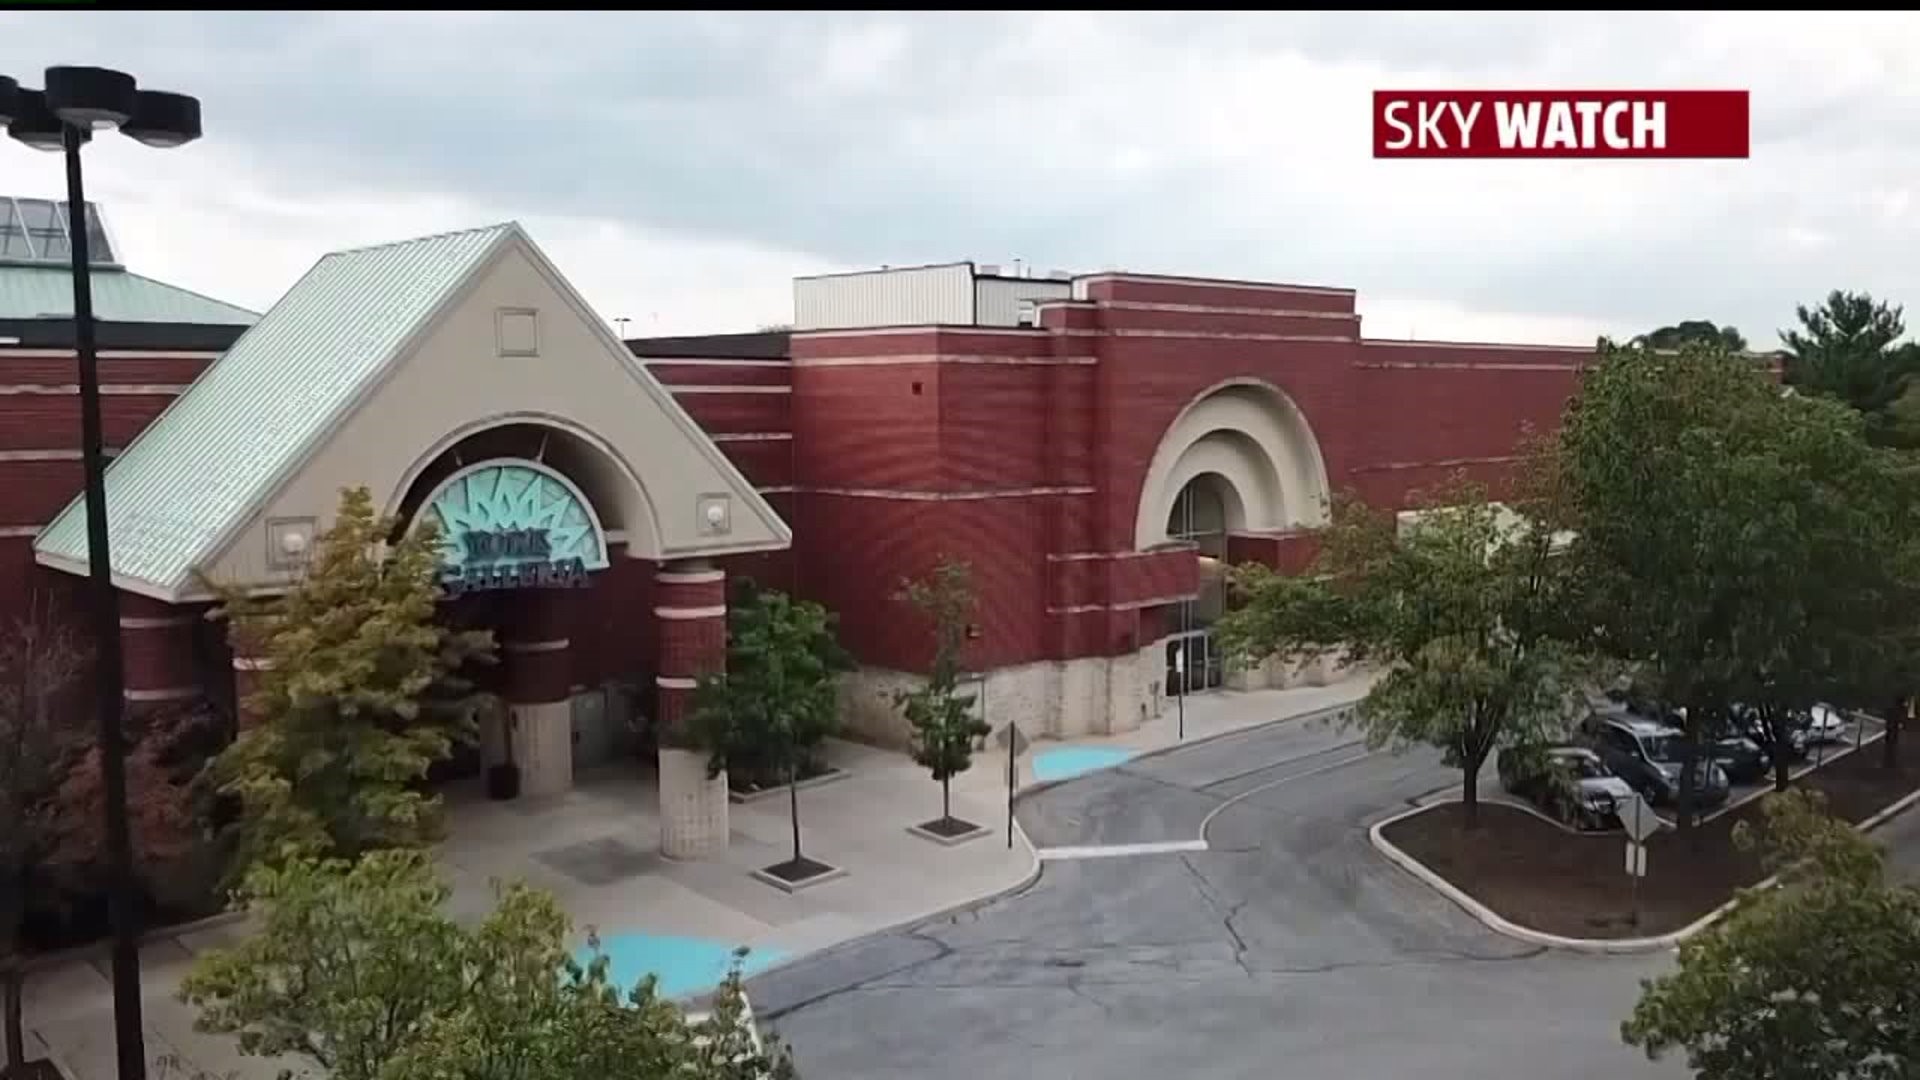 Is The York Galleria Mall Right For A Mini Casino Springettsbury Township Officials Say Yes Fox43 Com